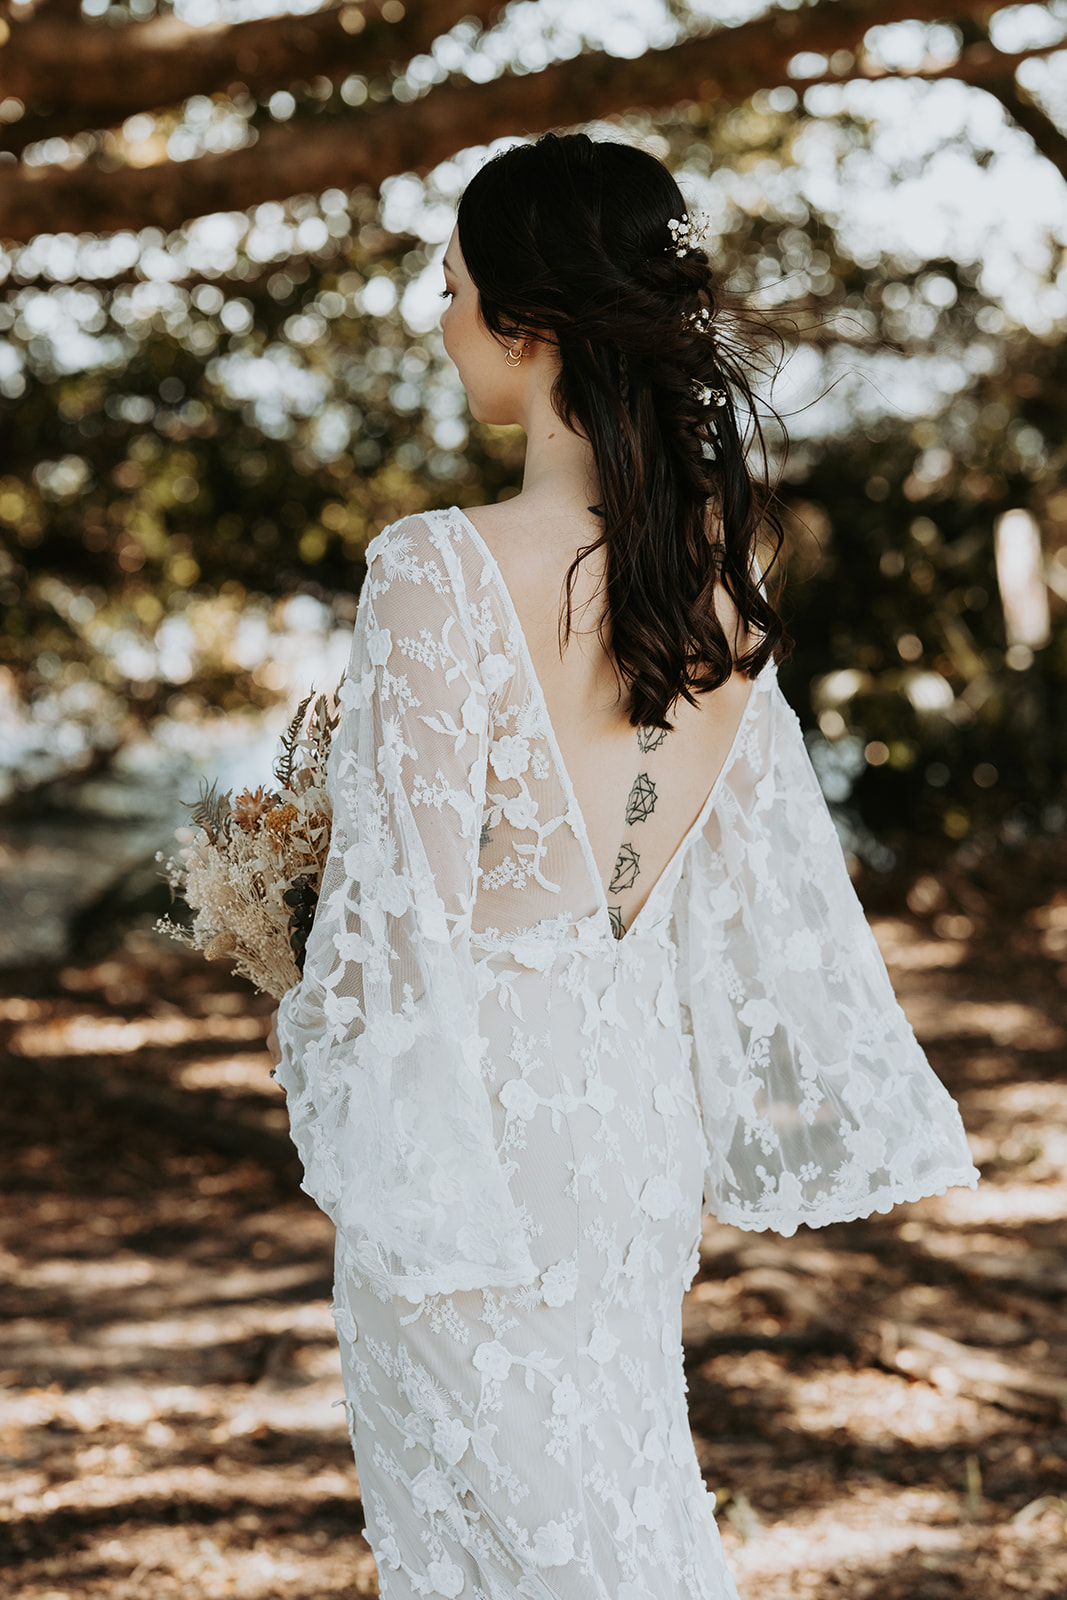 bride-in-the-ooutdoors-wearing-a-lace-backless-wedding-dress